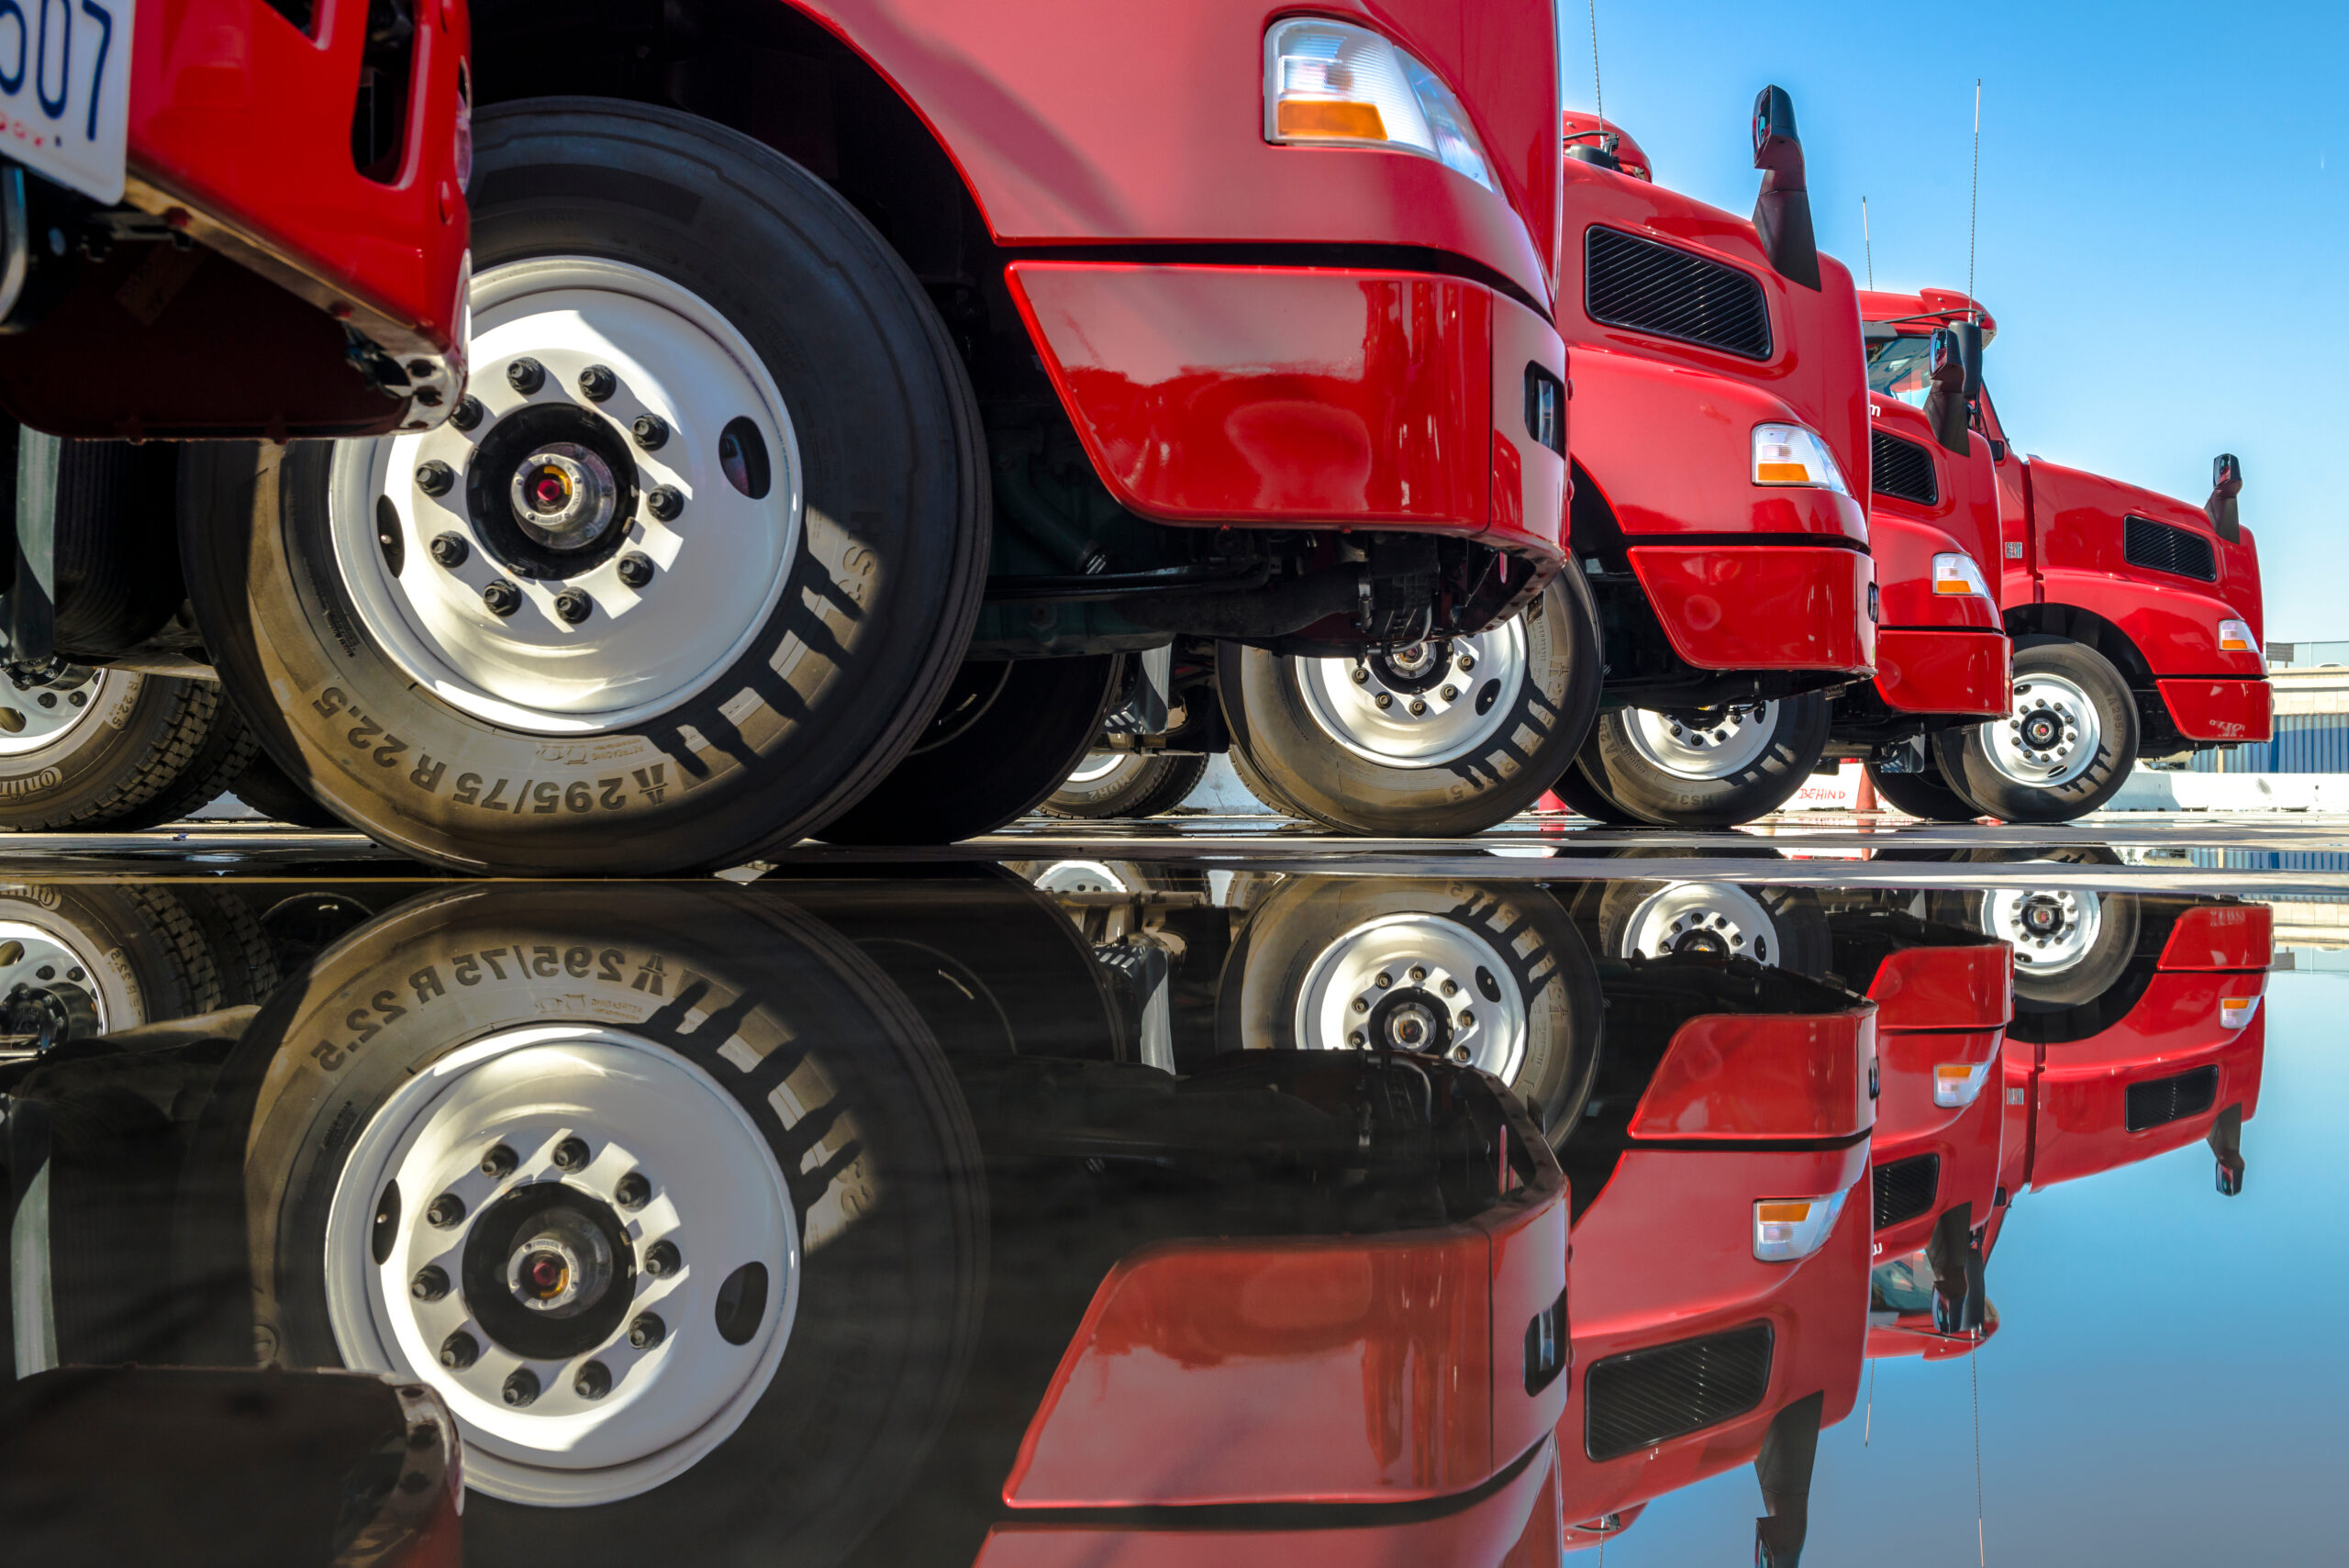 red semi trucks lined up and reflecting in a puddle of water in a parking lot